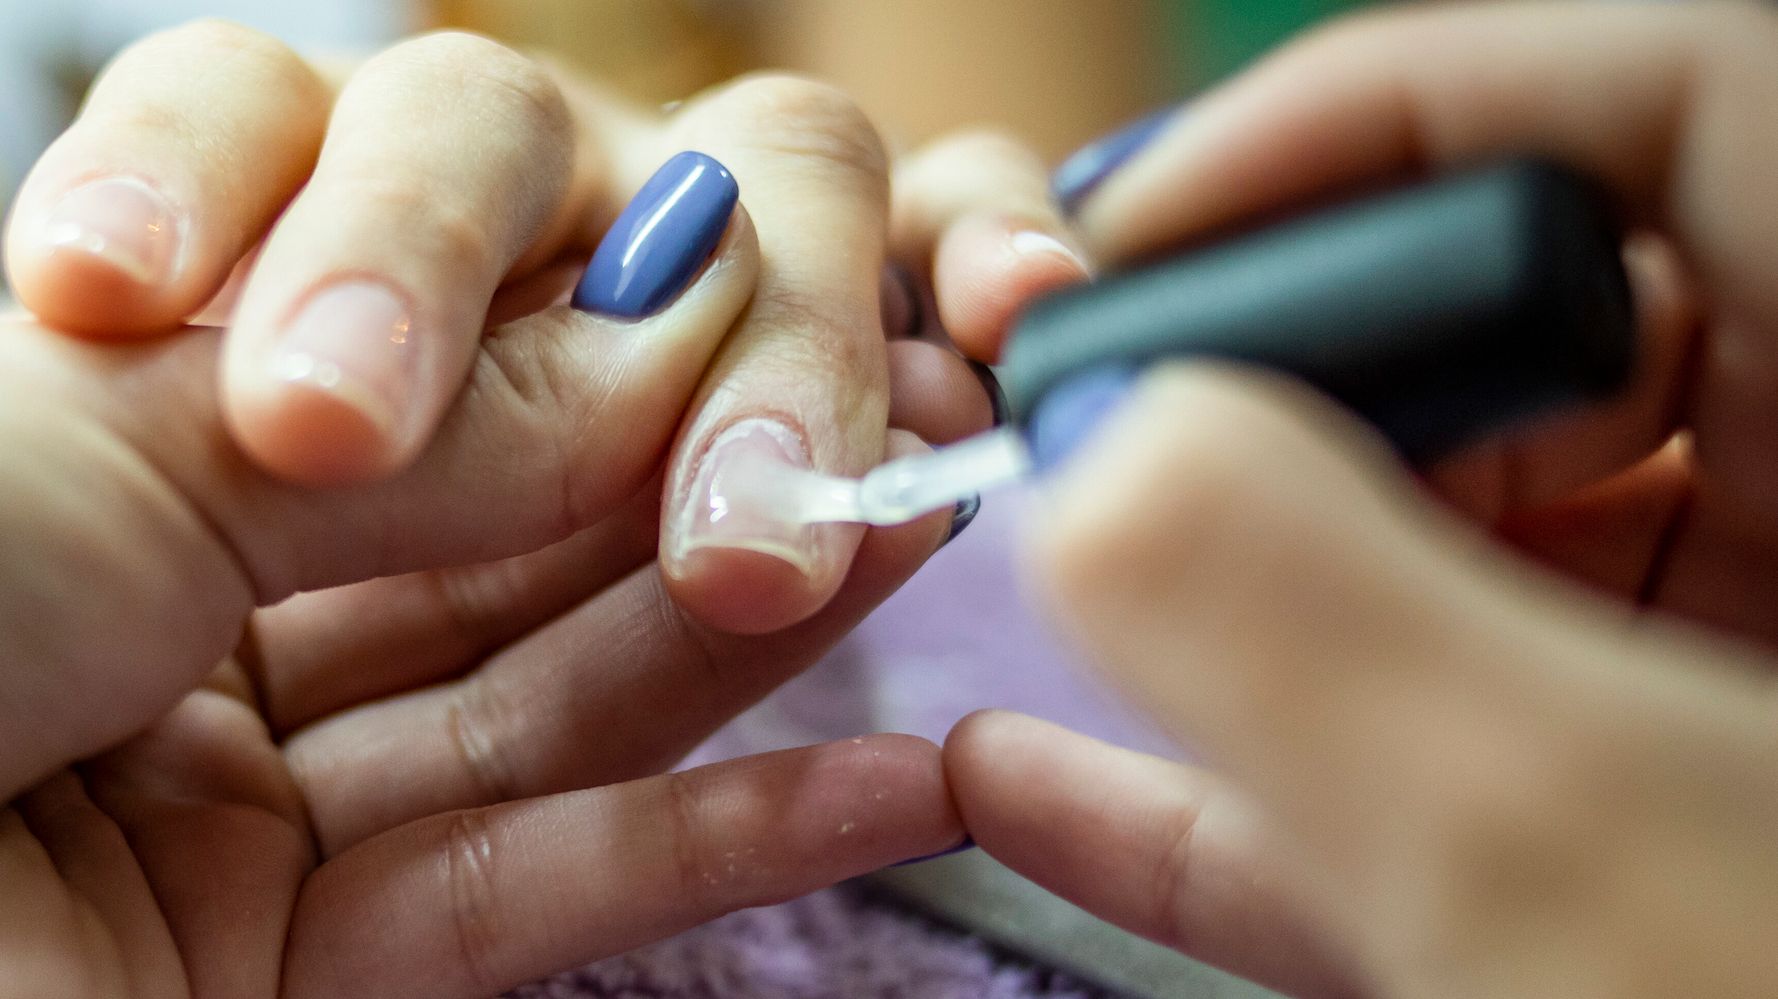 Woman Mistakes Nail Glue For Eyedrops In Middle-Of-The-Night Horror